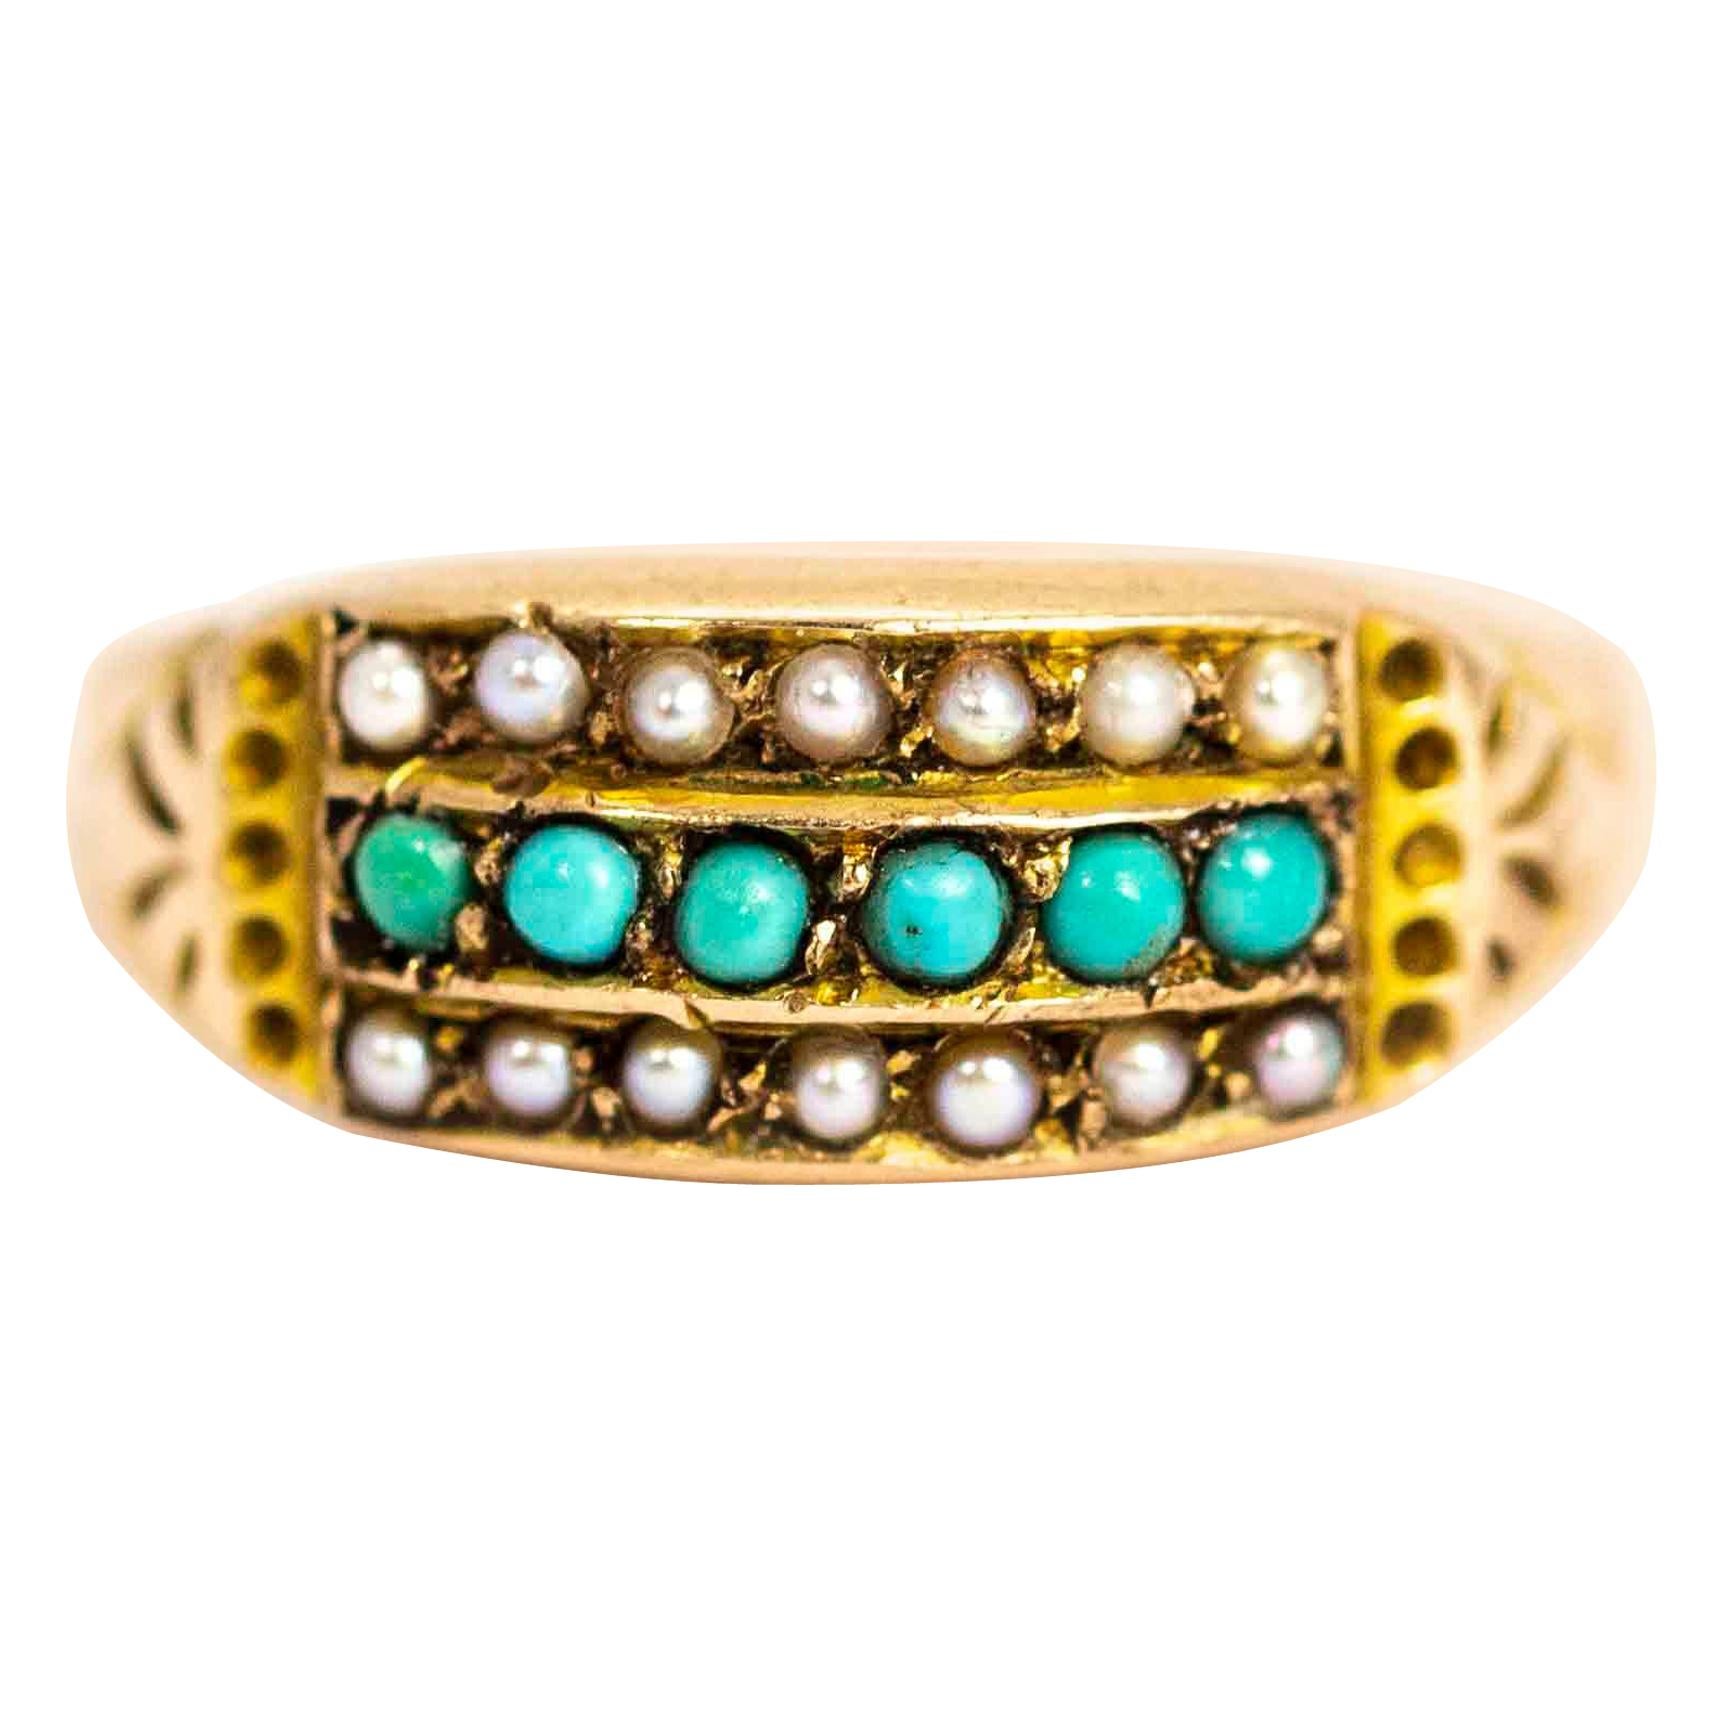 Victorian 9 Carat Gold Pearl and Turquoise Triple Ring